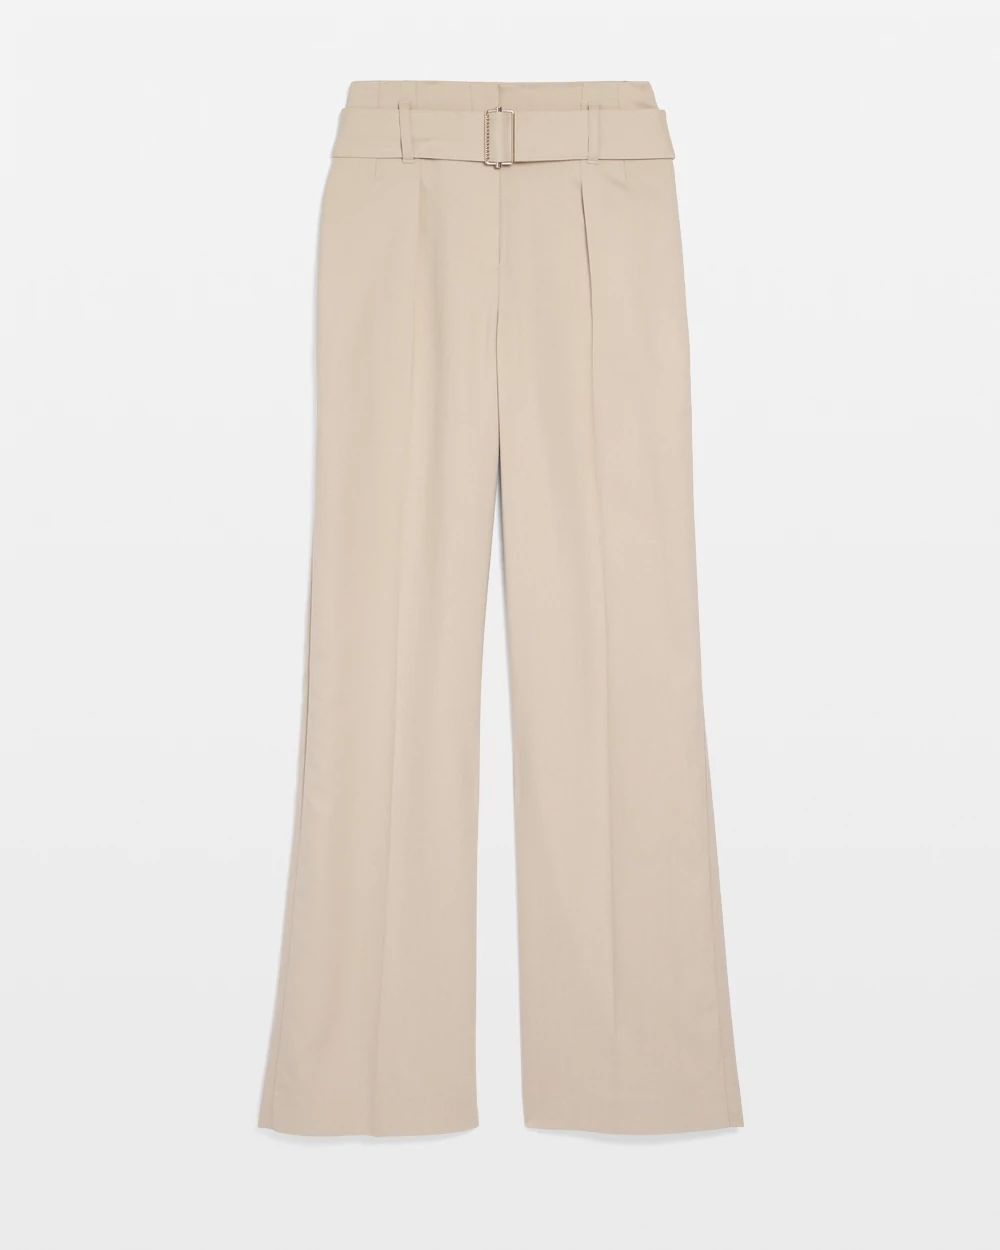 Petite Belted Wide-Leg Woven Pants click to view larger image.